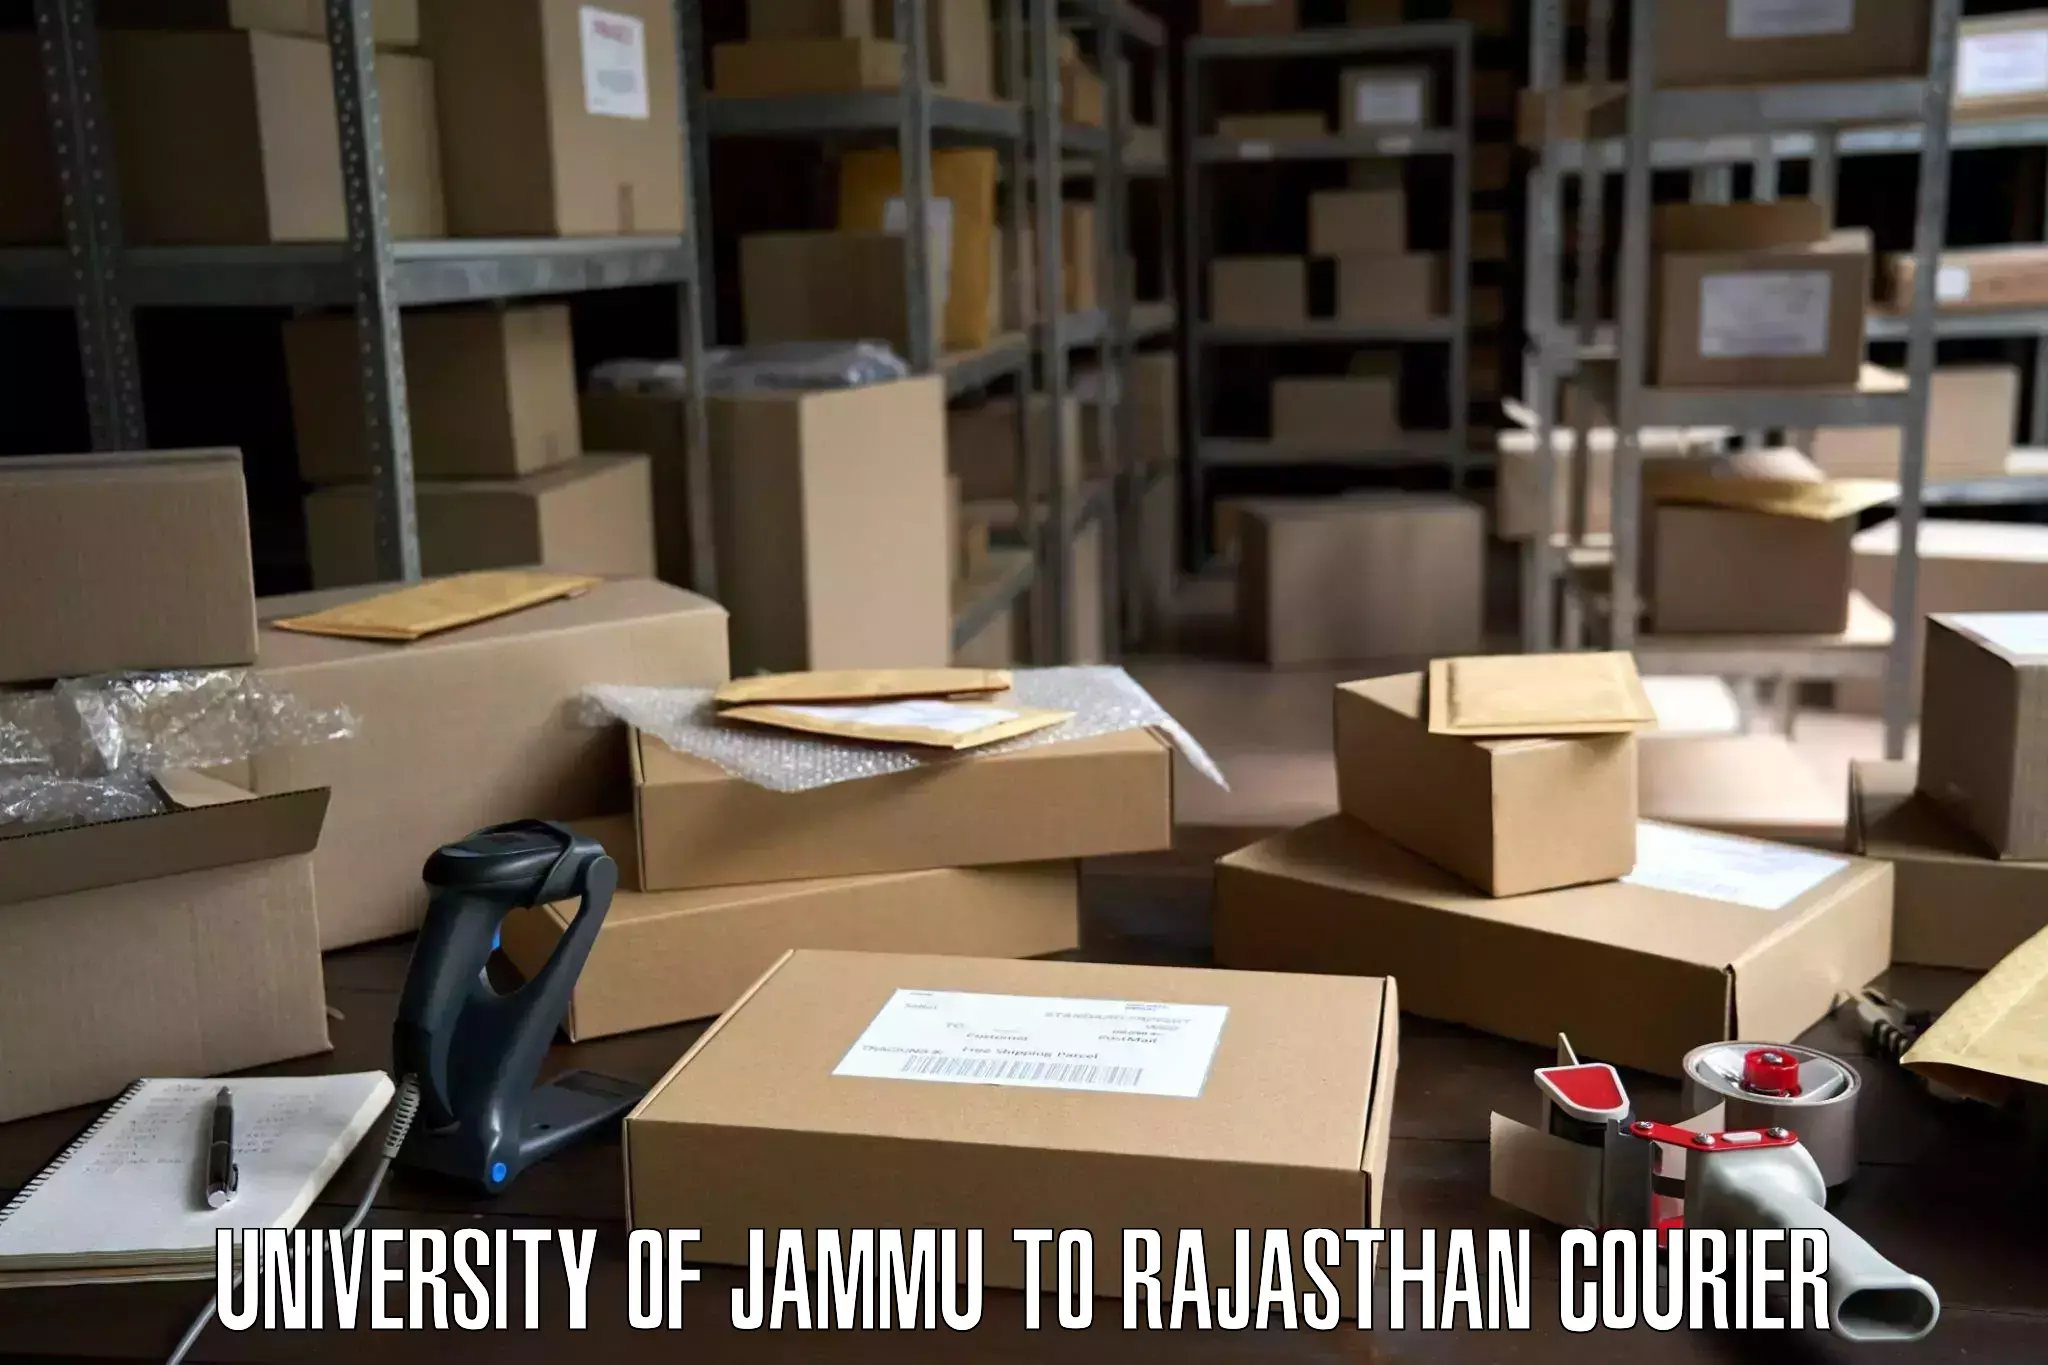 Furniture moving assistance University of Jammu to Rajasthan